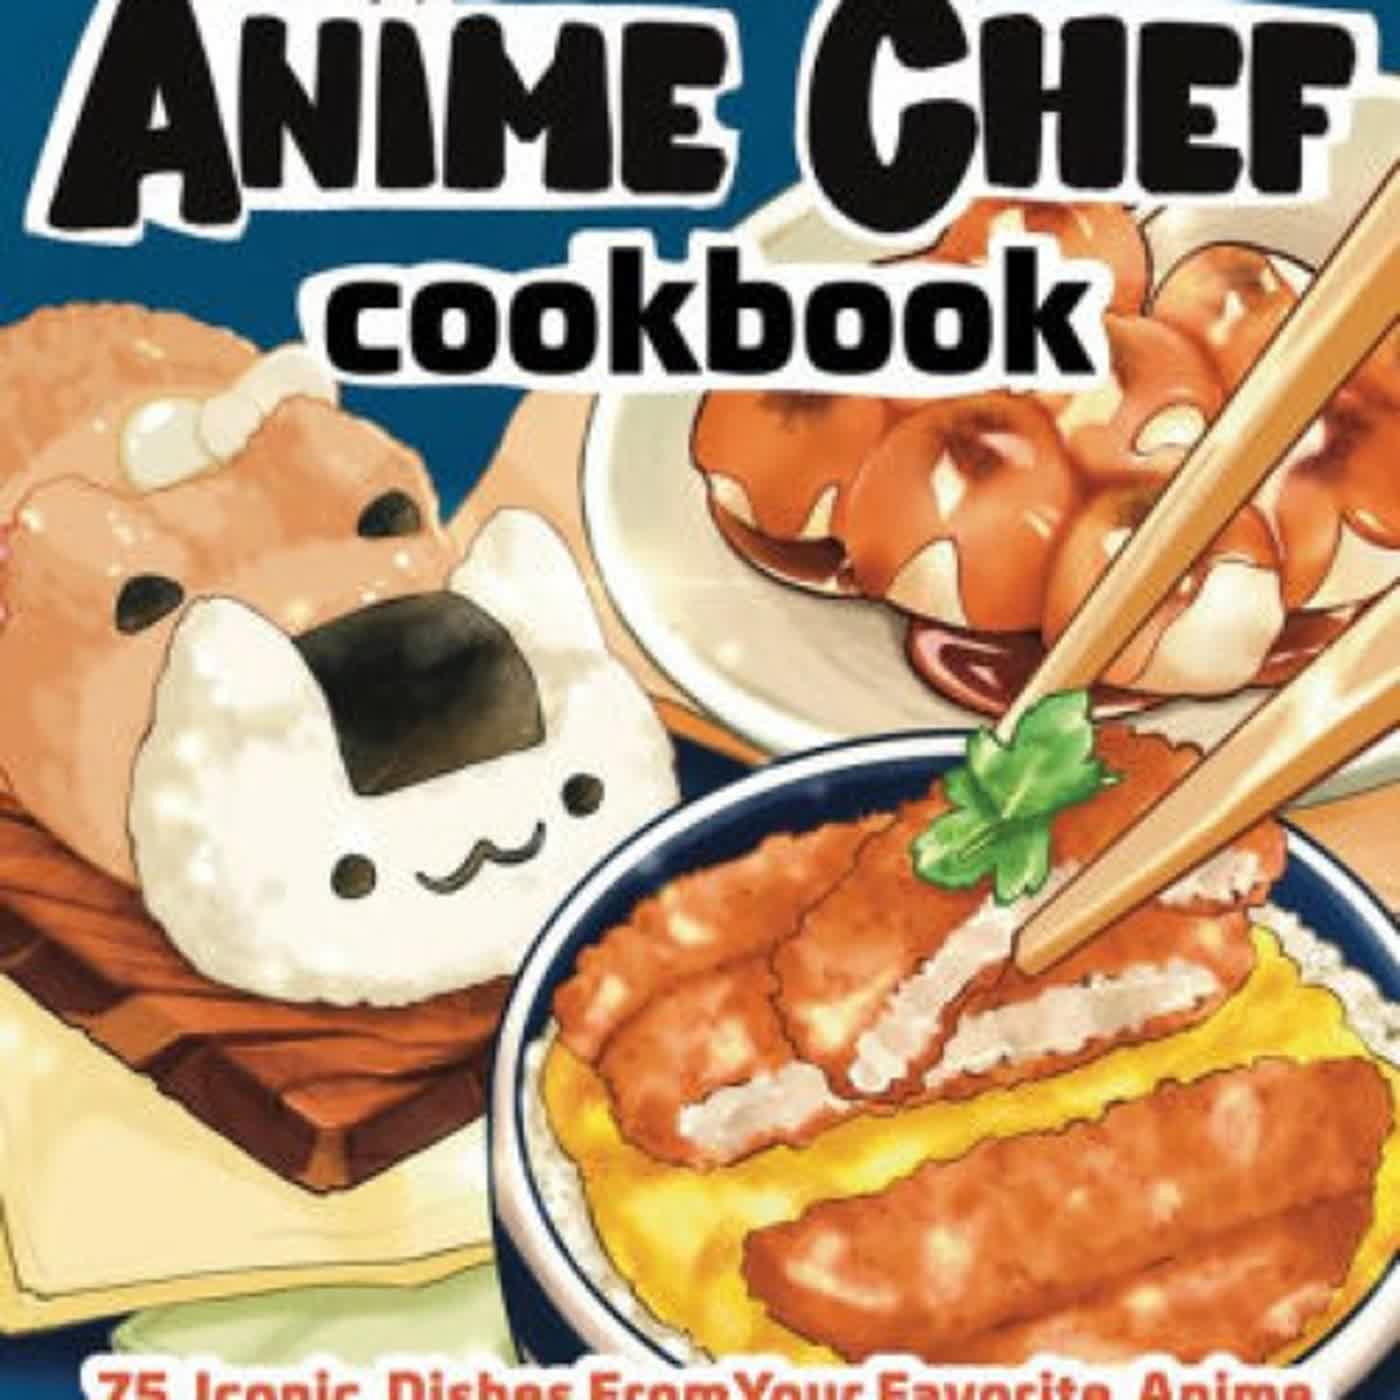 PDF [Download] The Anime Chef Cookbook: 75 Iconic Dishes from Your Favorite Anime by Nadine Estero